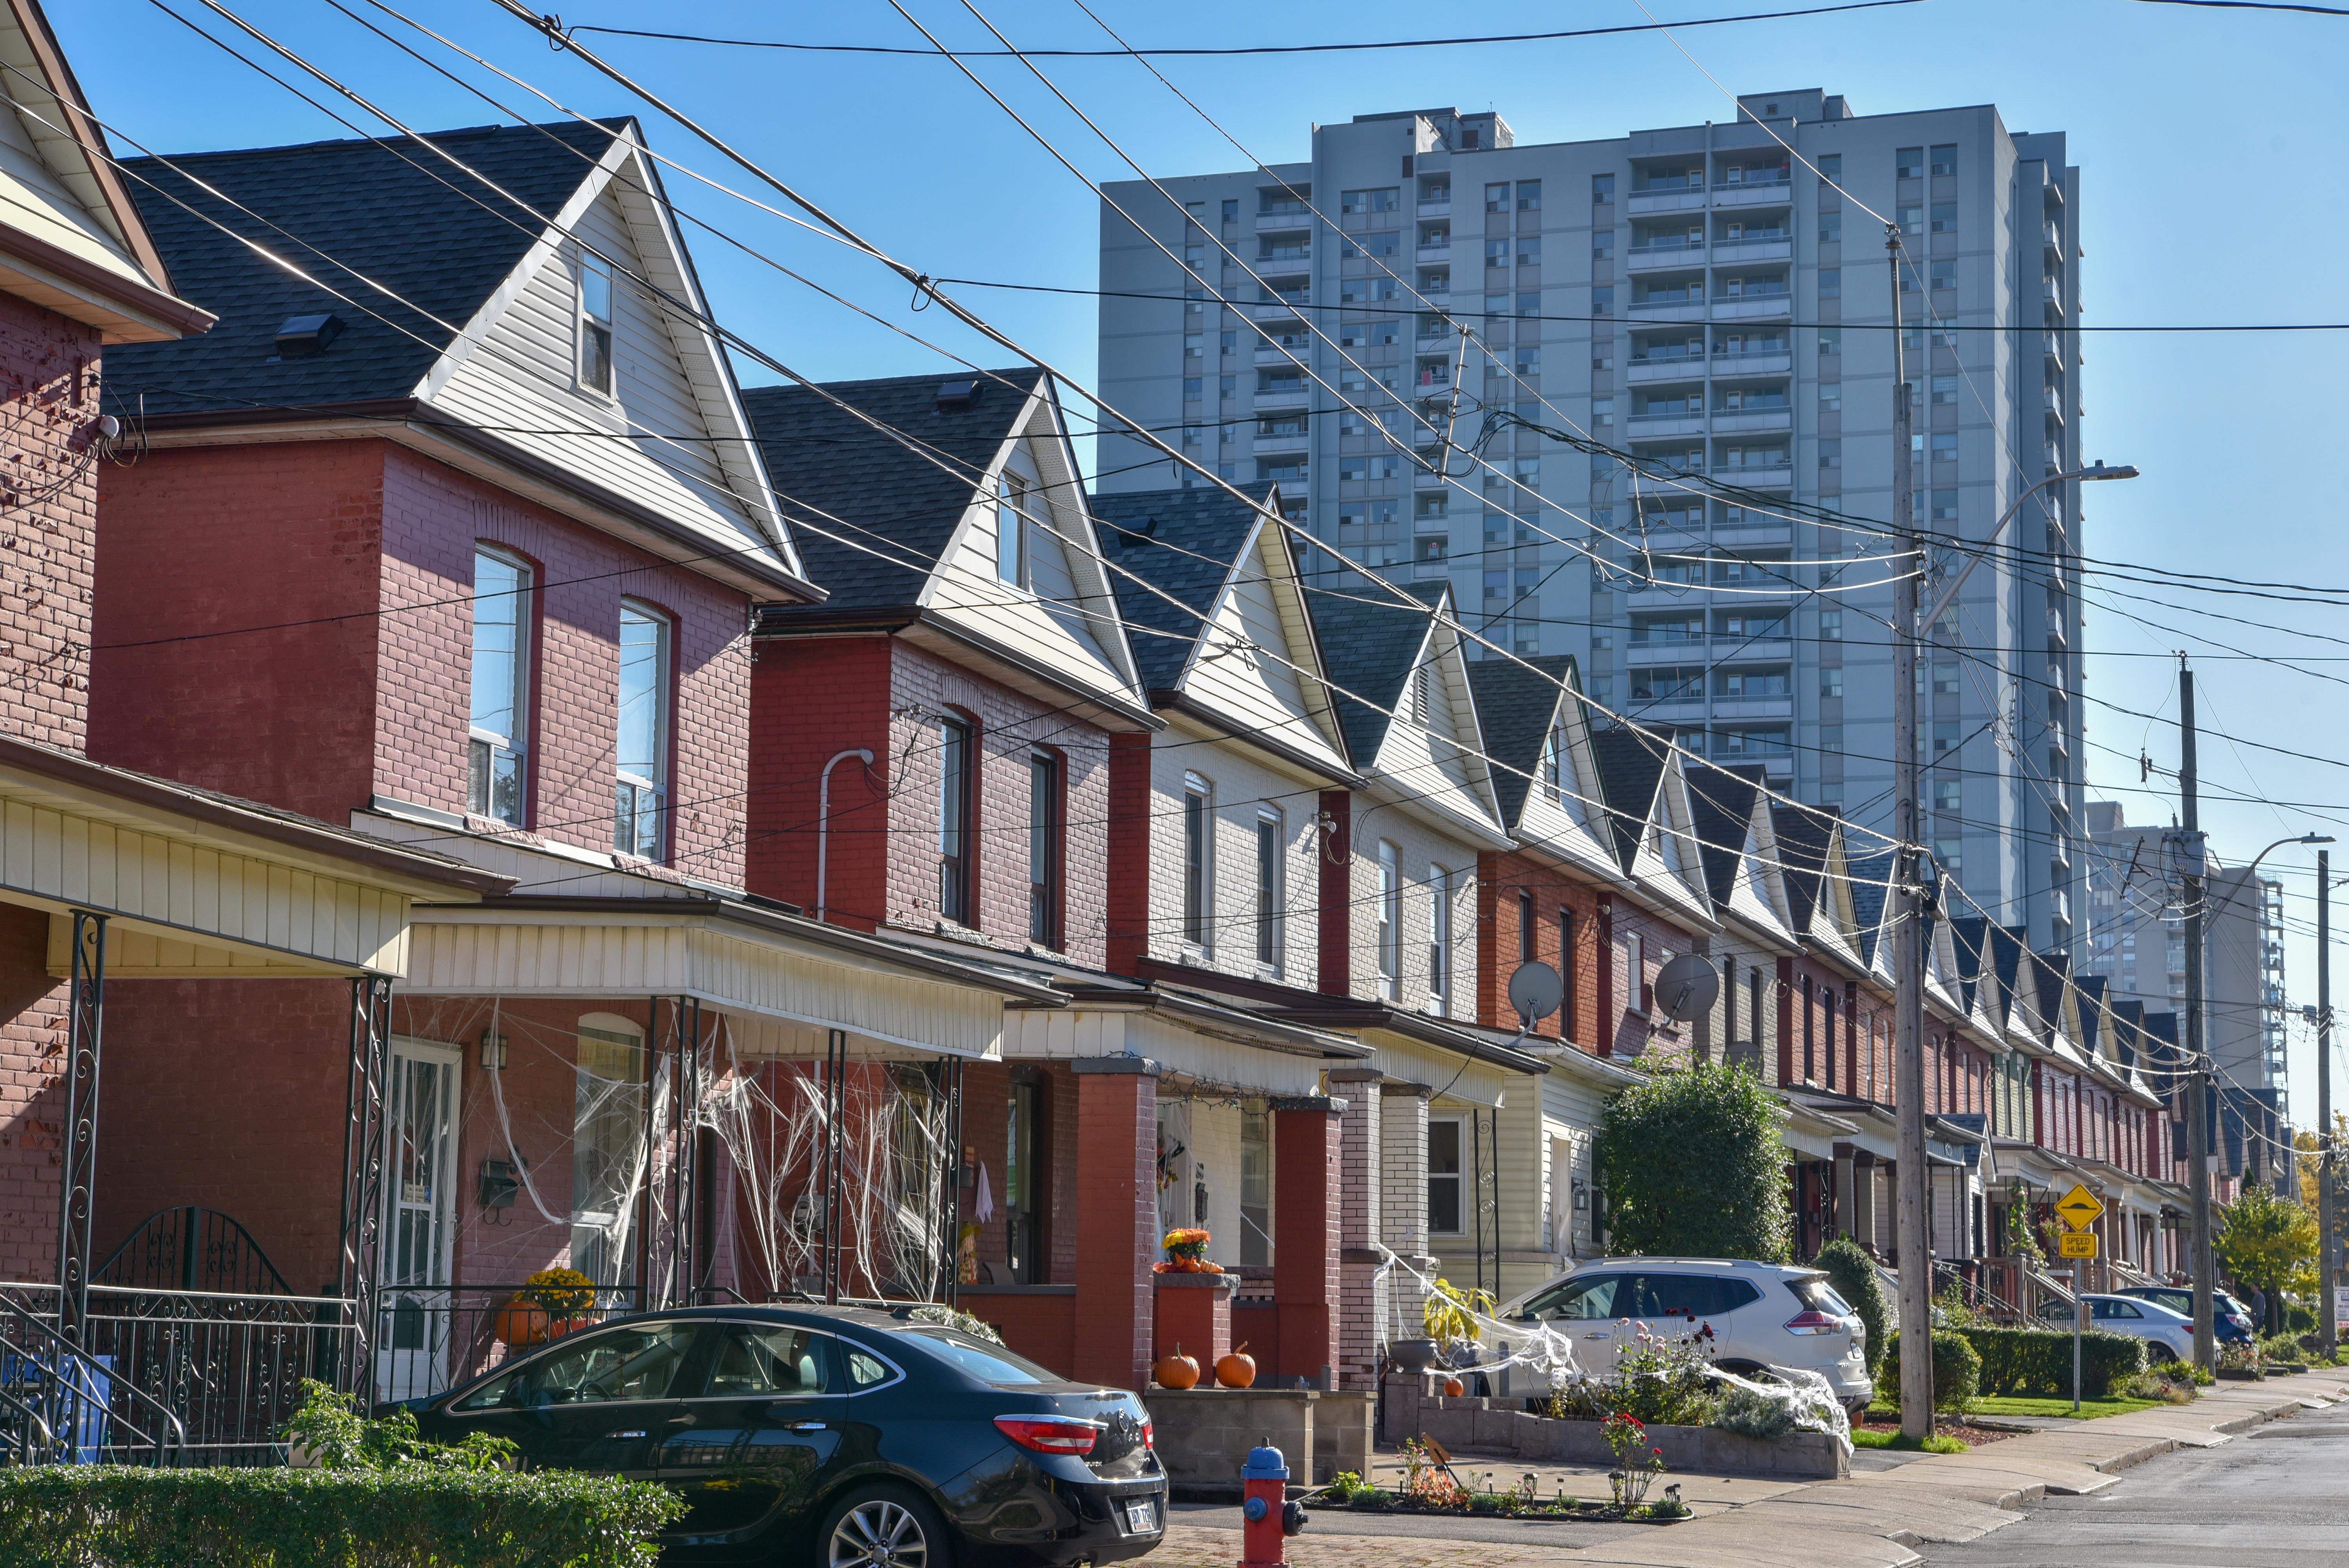 Row of early 20th century homes with sun shining off façade 